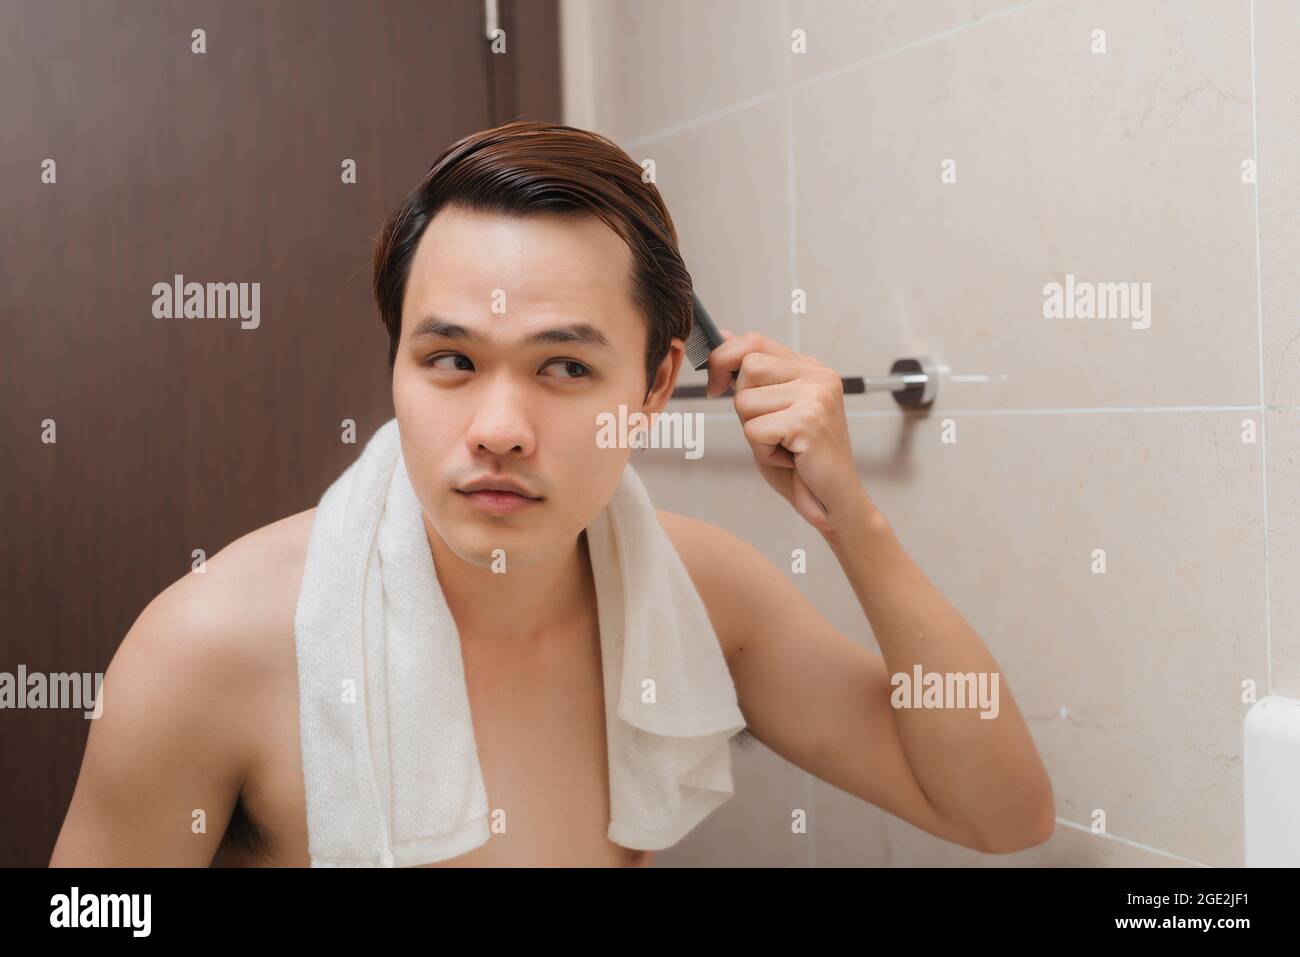 Morning routine. Rear view of handsome young man combing his hair while standing against a mirror Stock Photo